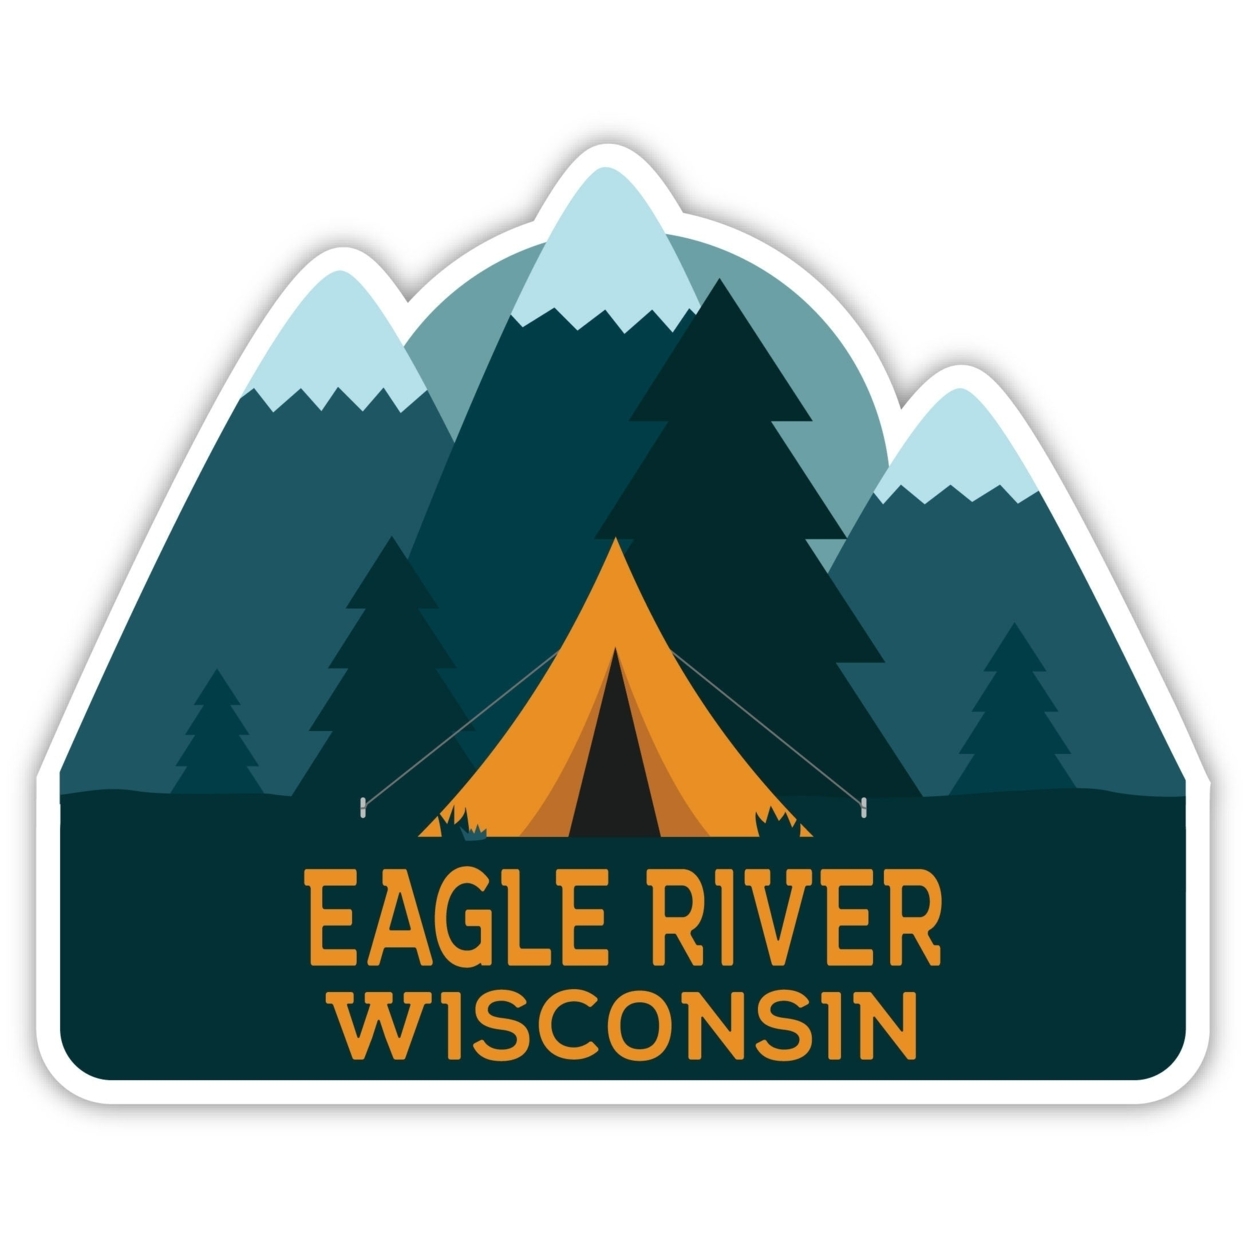 Eagle River Wisconsin Souvenir Decorative Stickers (Choose Theme And Size) - Single Unit, 8-Inch, Camp Life